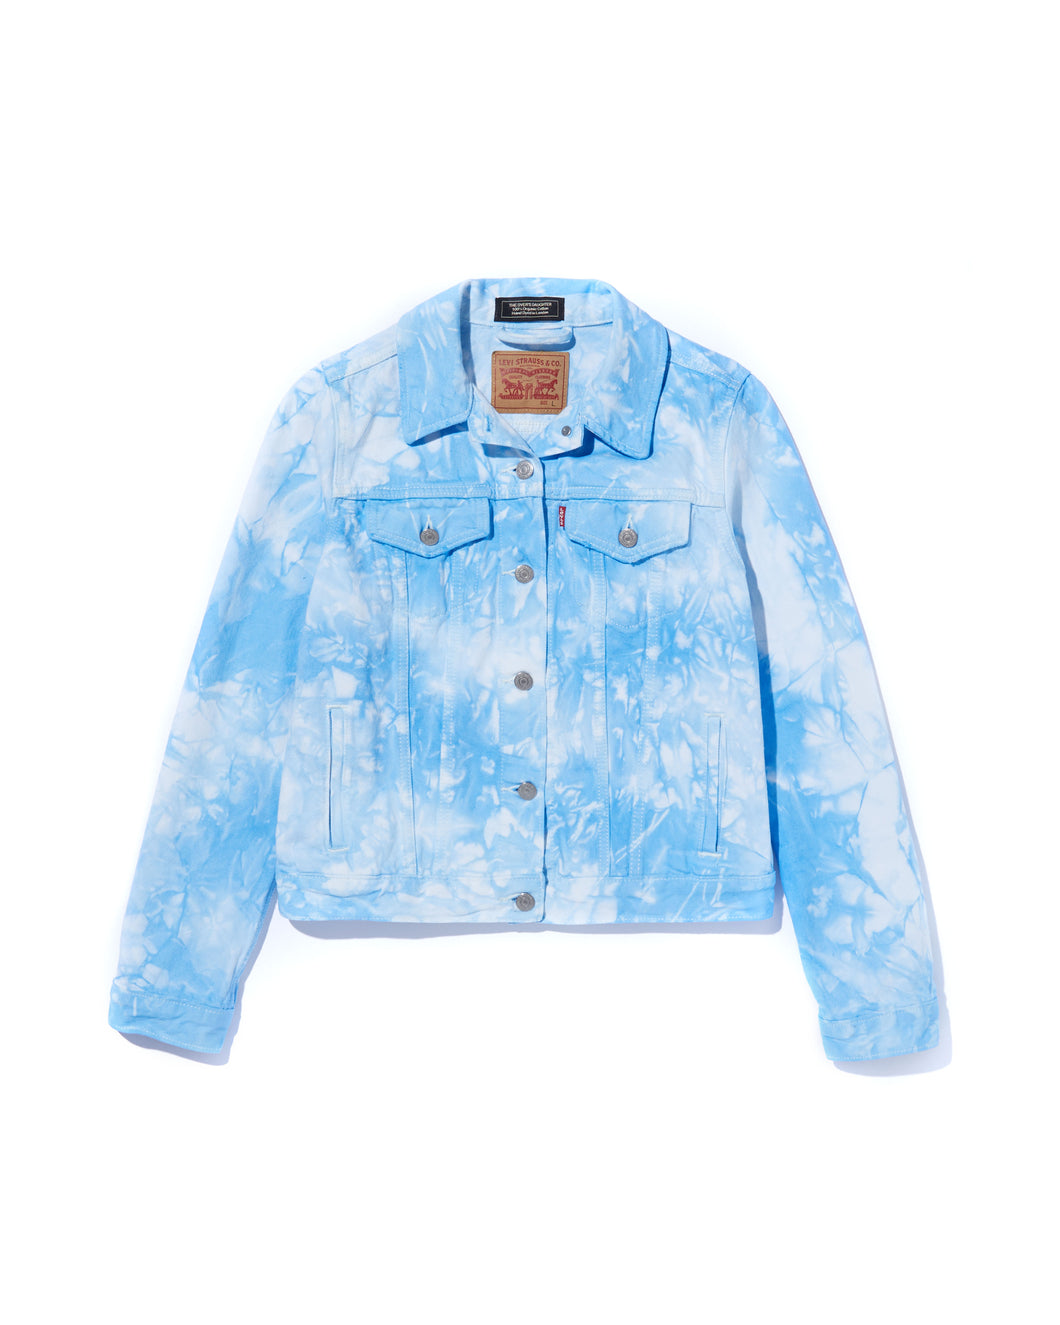 LEVIS x The Dyer’s Daughter Hand-Dyed Denim Jacket in BLUE SKIES